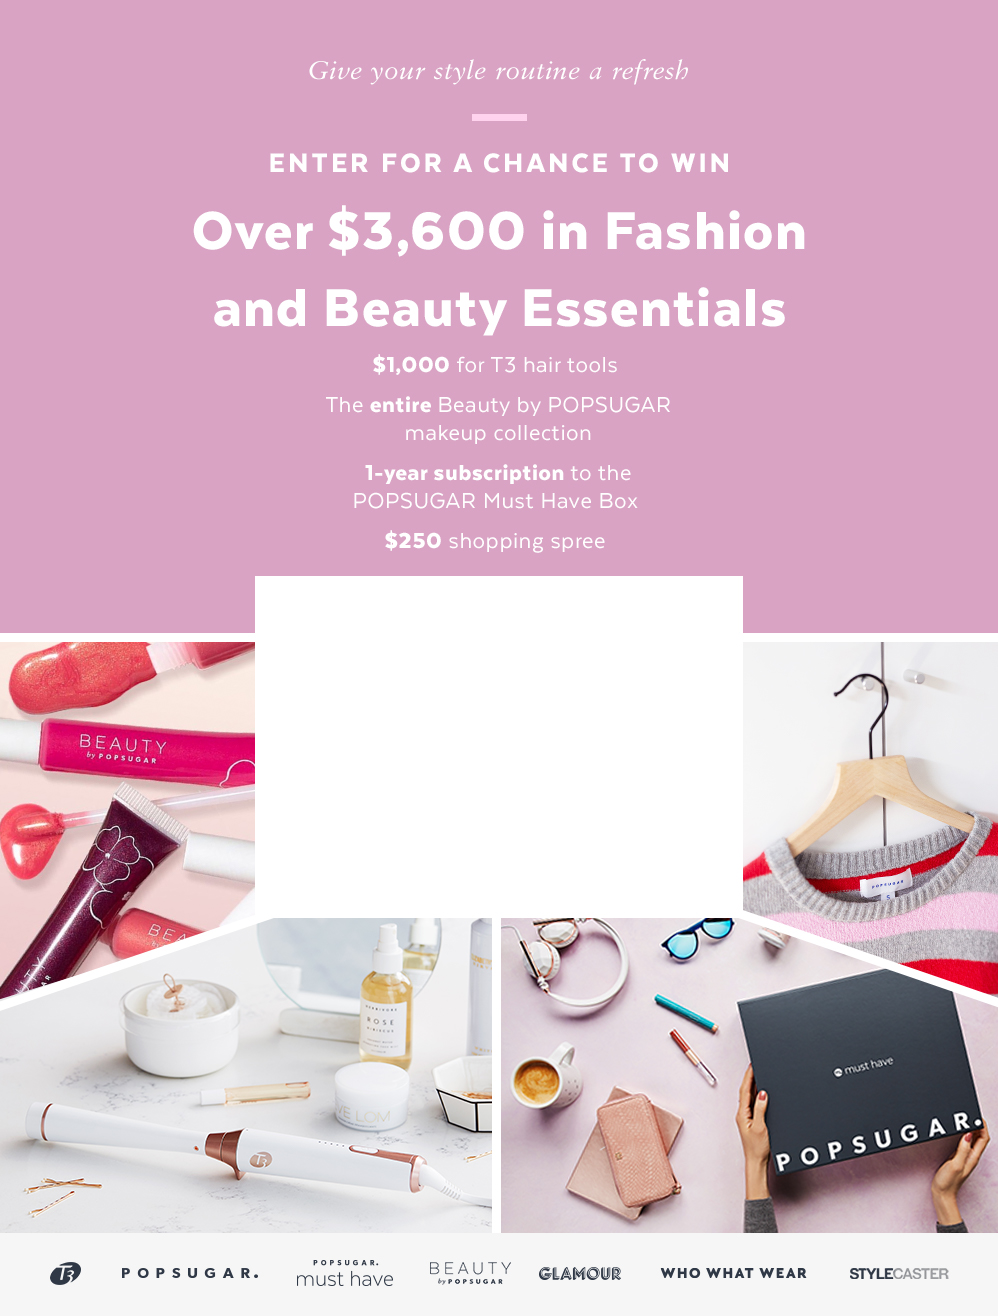 Win Over $3,600 in Fashion and Beauty Essentials | POPSUGAR Beauty